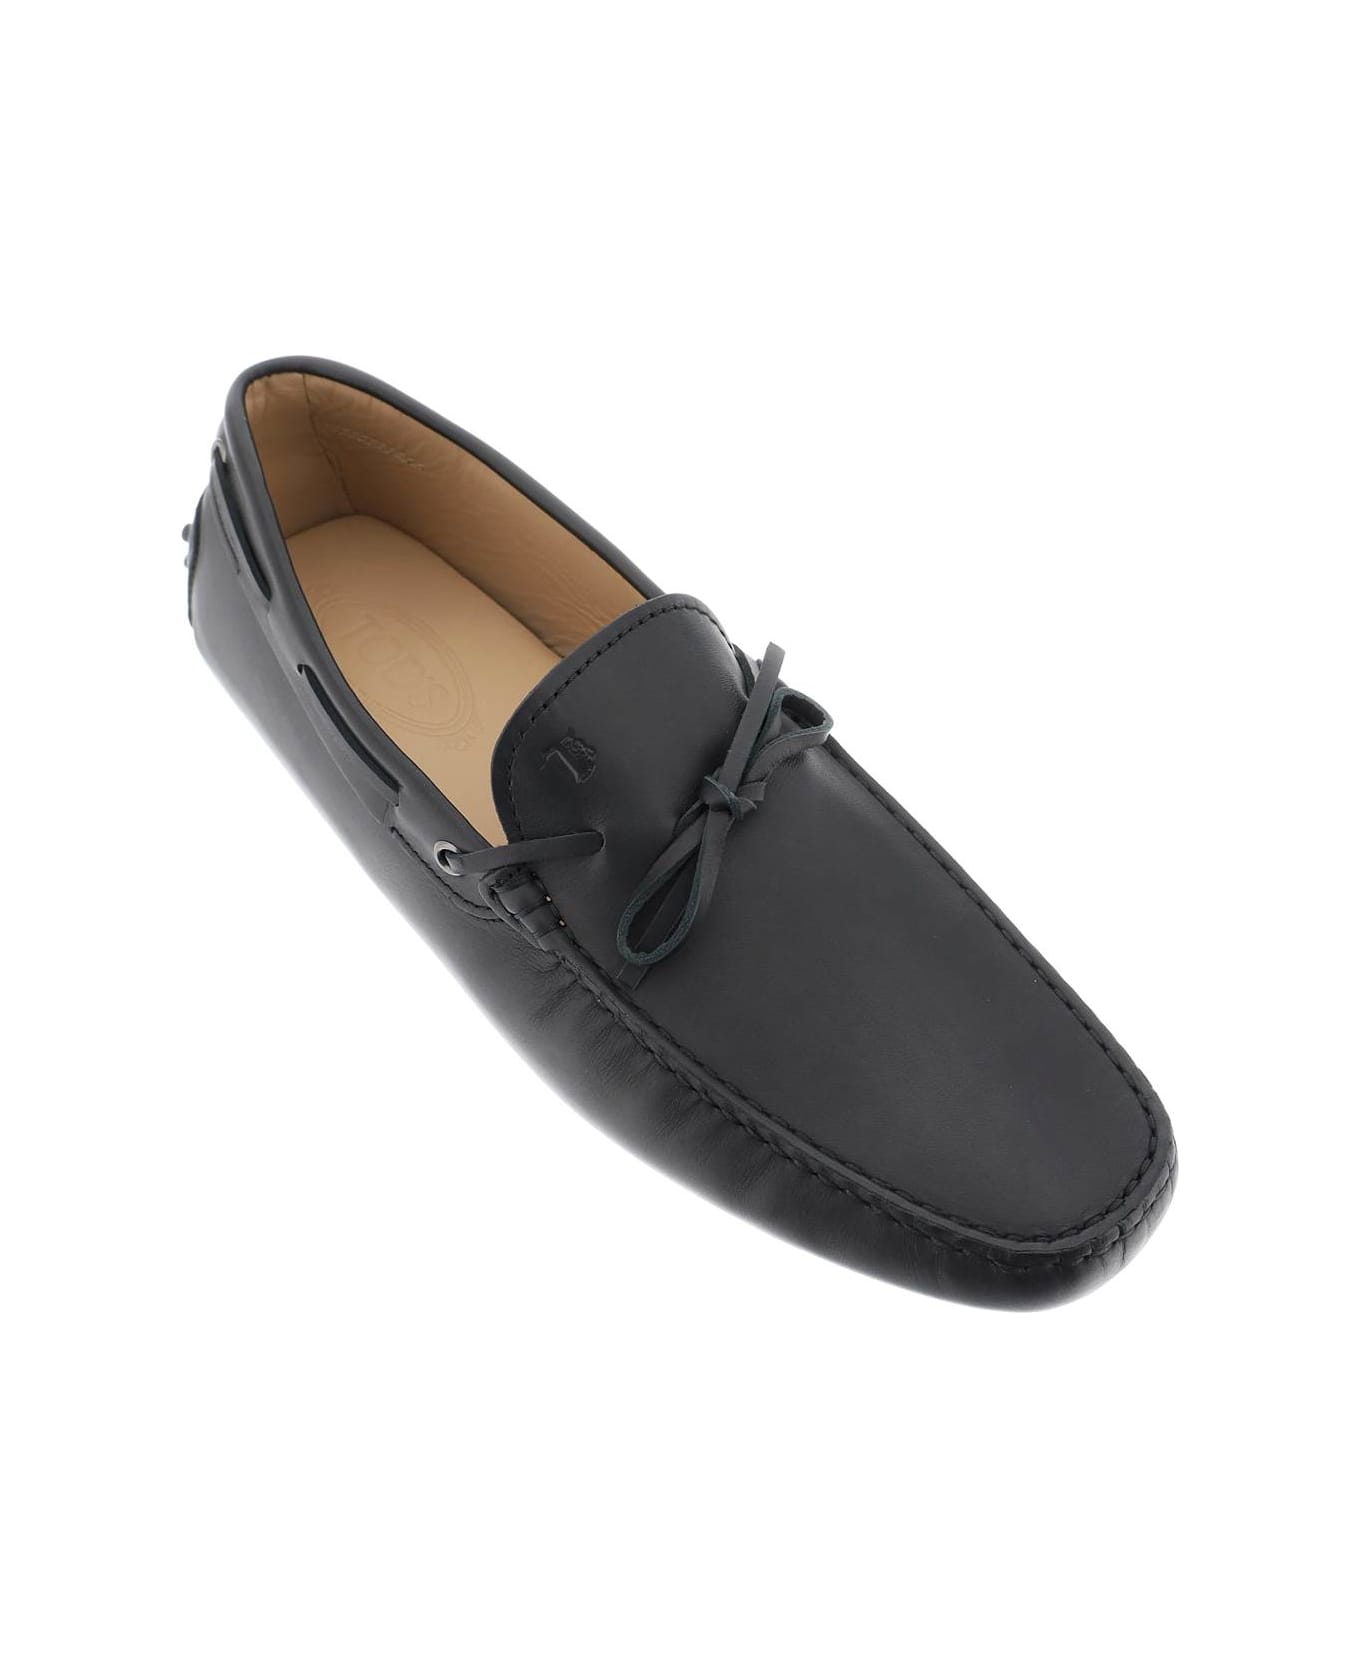 Tod's Gommino Slip-on Driving Loafers - NERO (Black)